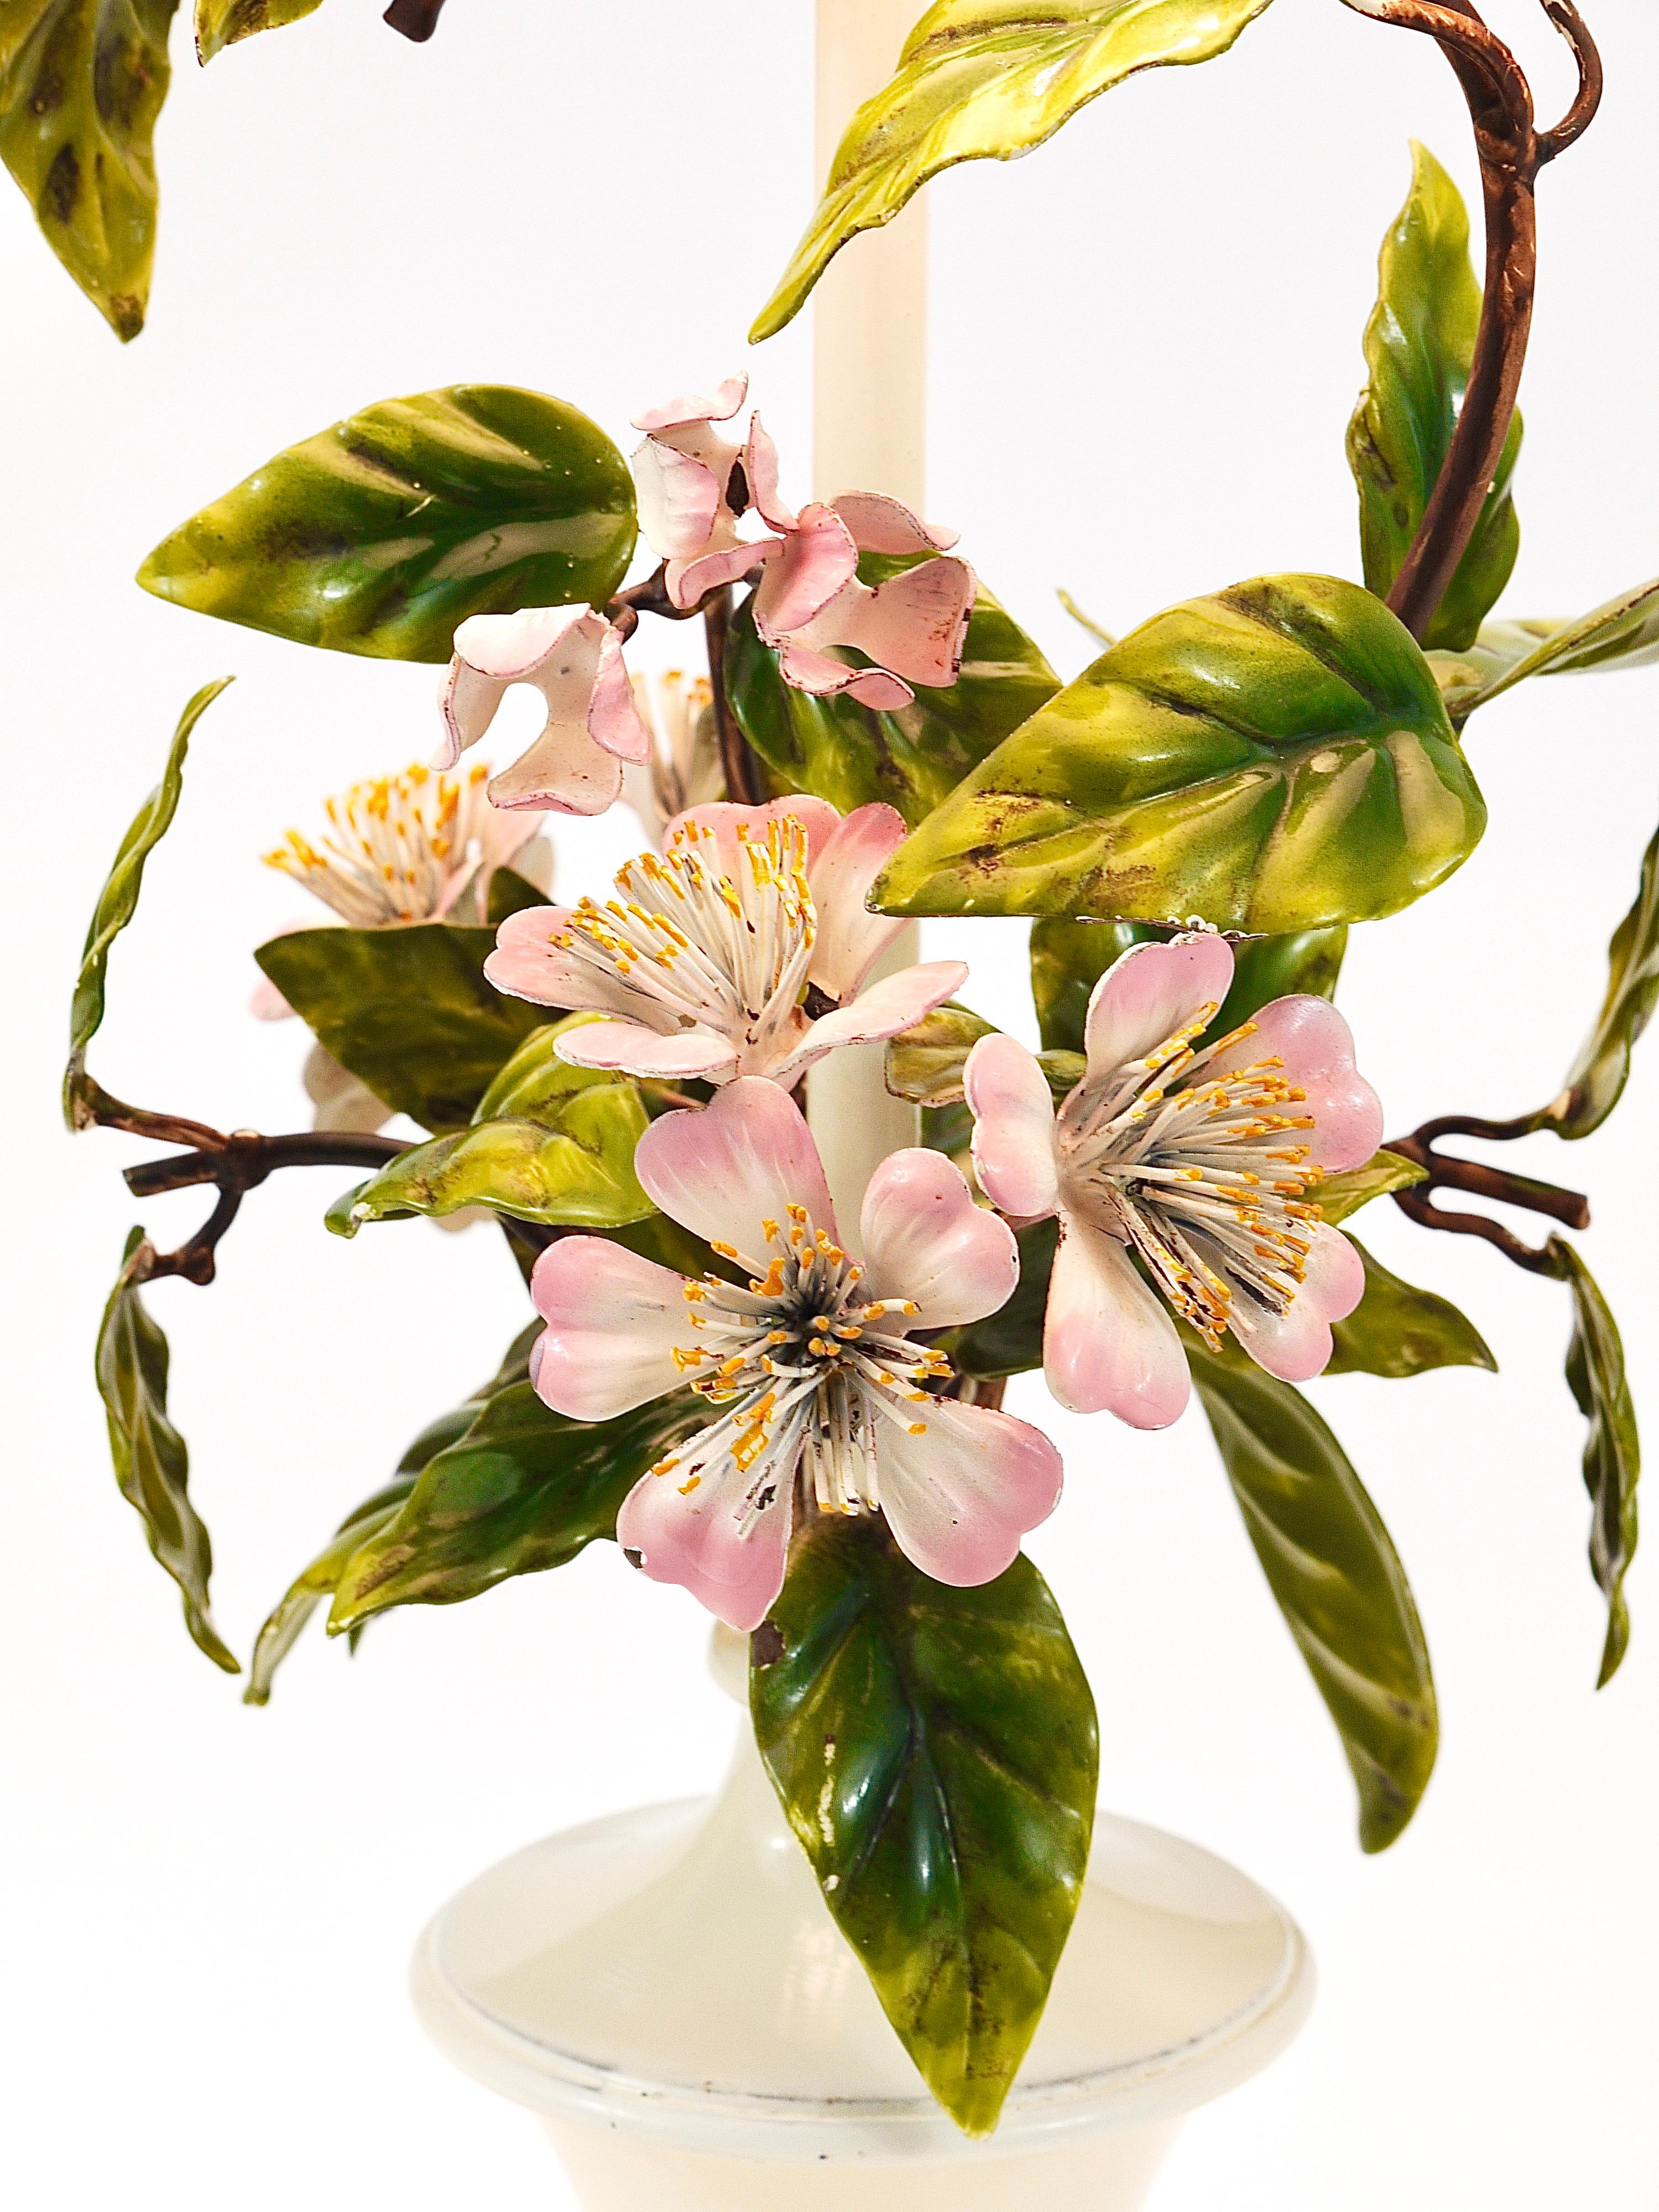 Salvadori Hand Painted Wild Apple Blossom Toleware Table Lamp, Italy, 1950s For Sale 7